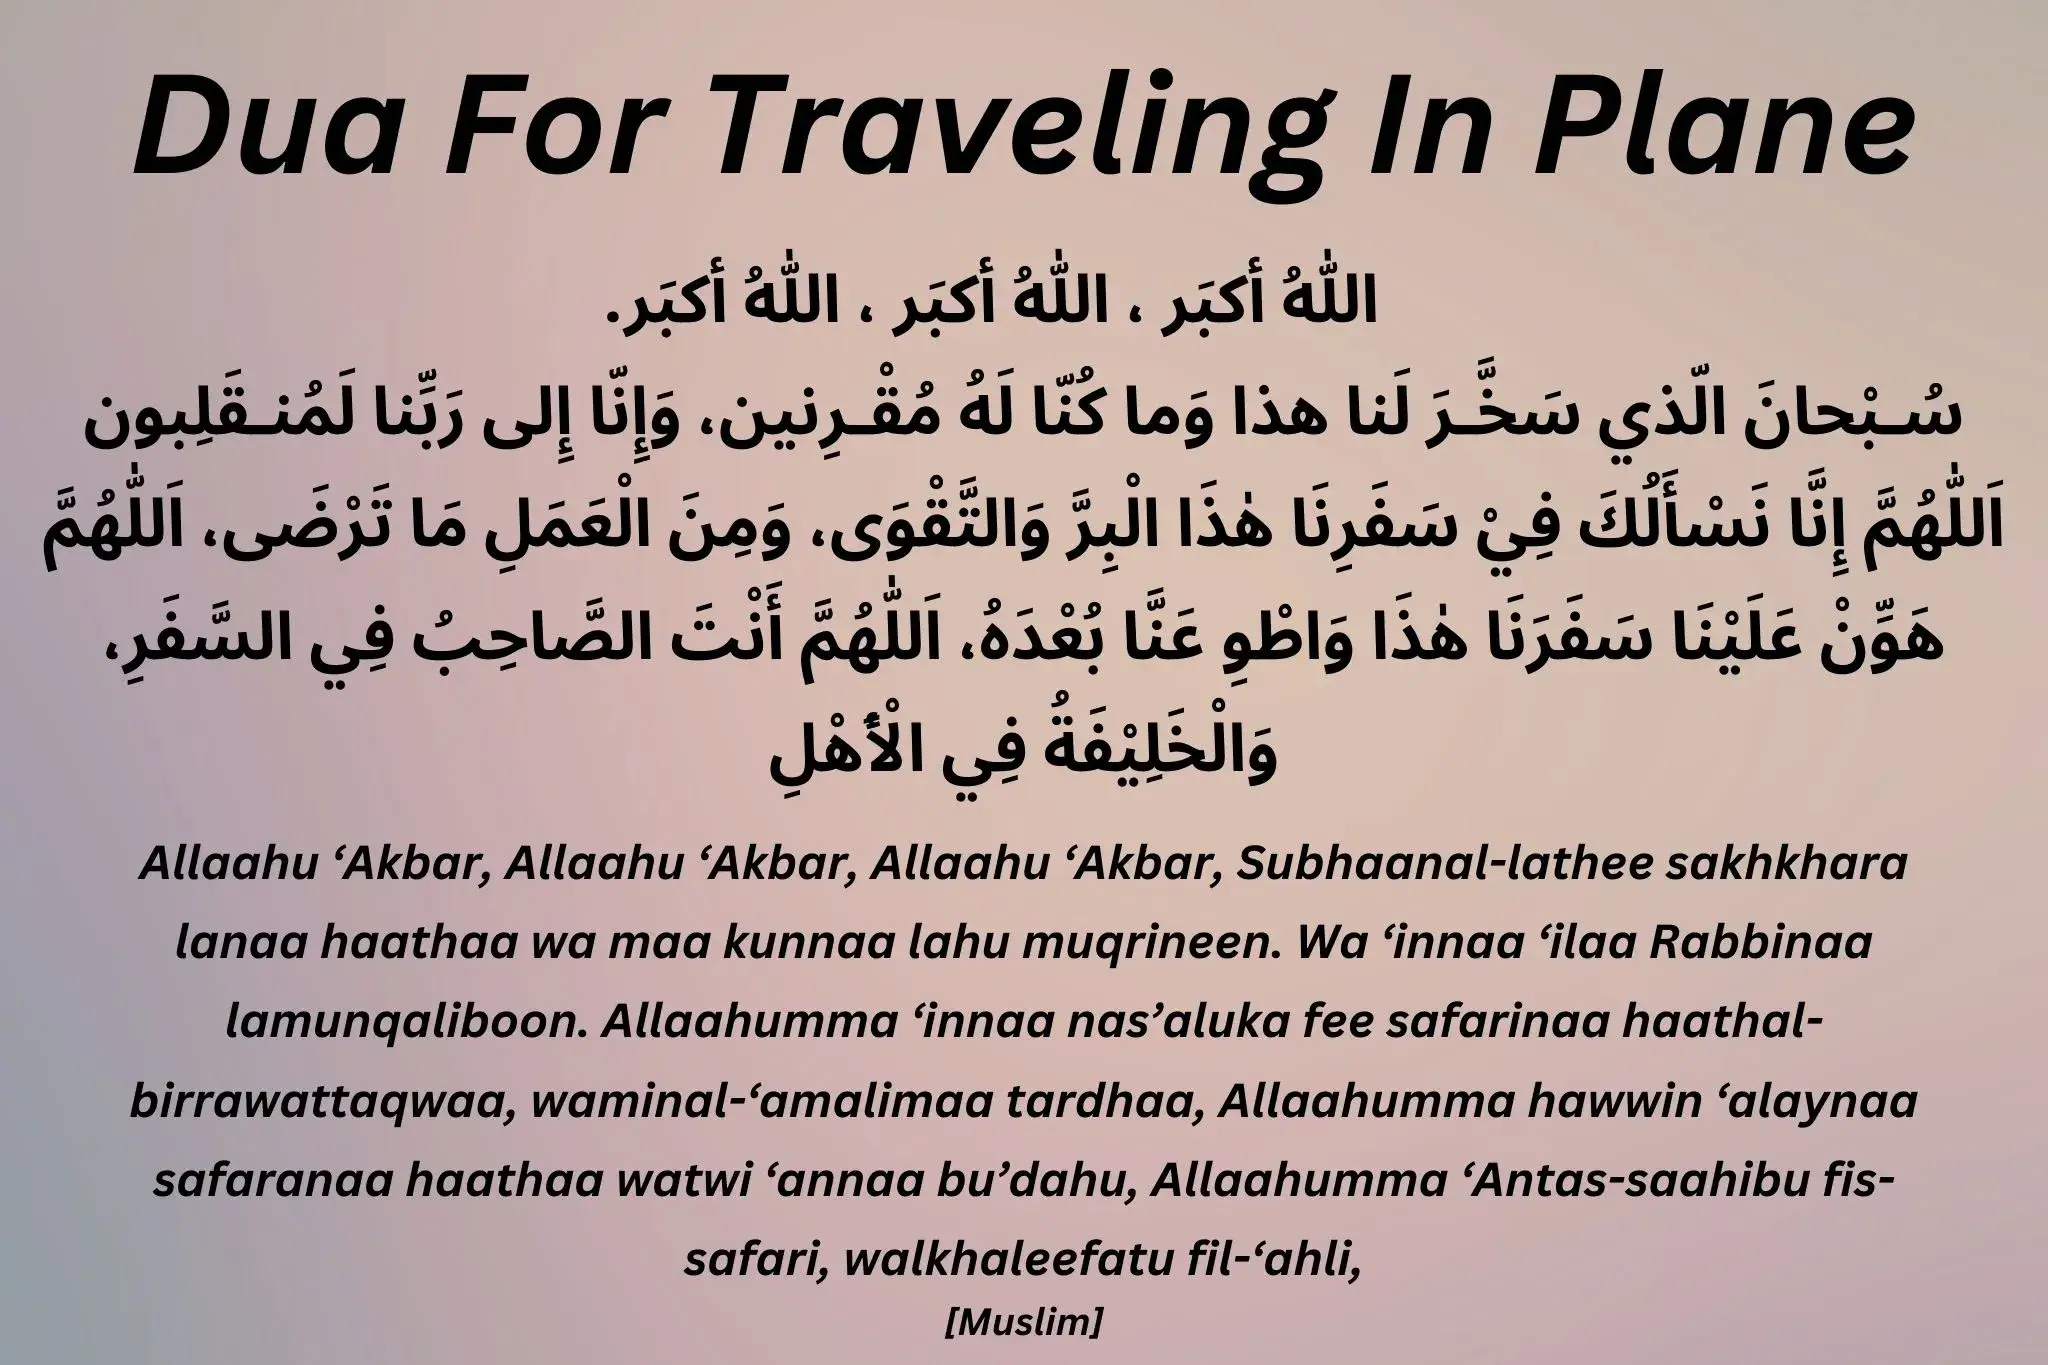 dua for traveling in plane